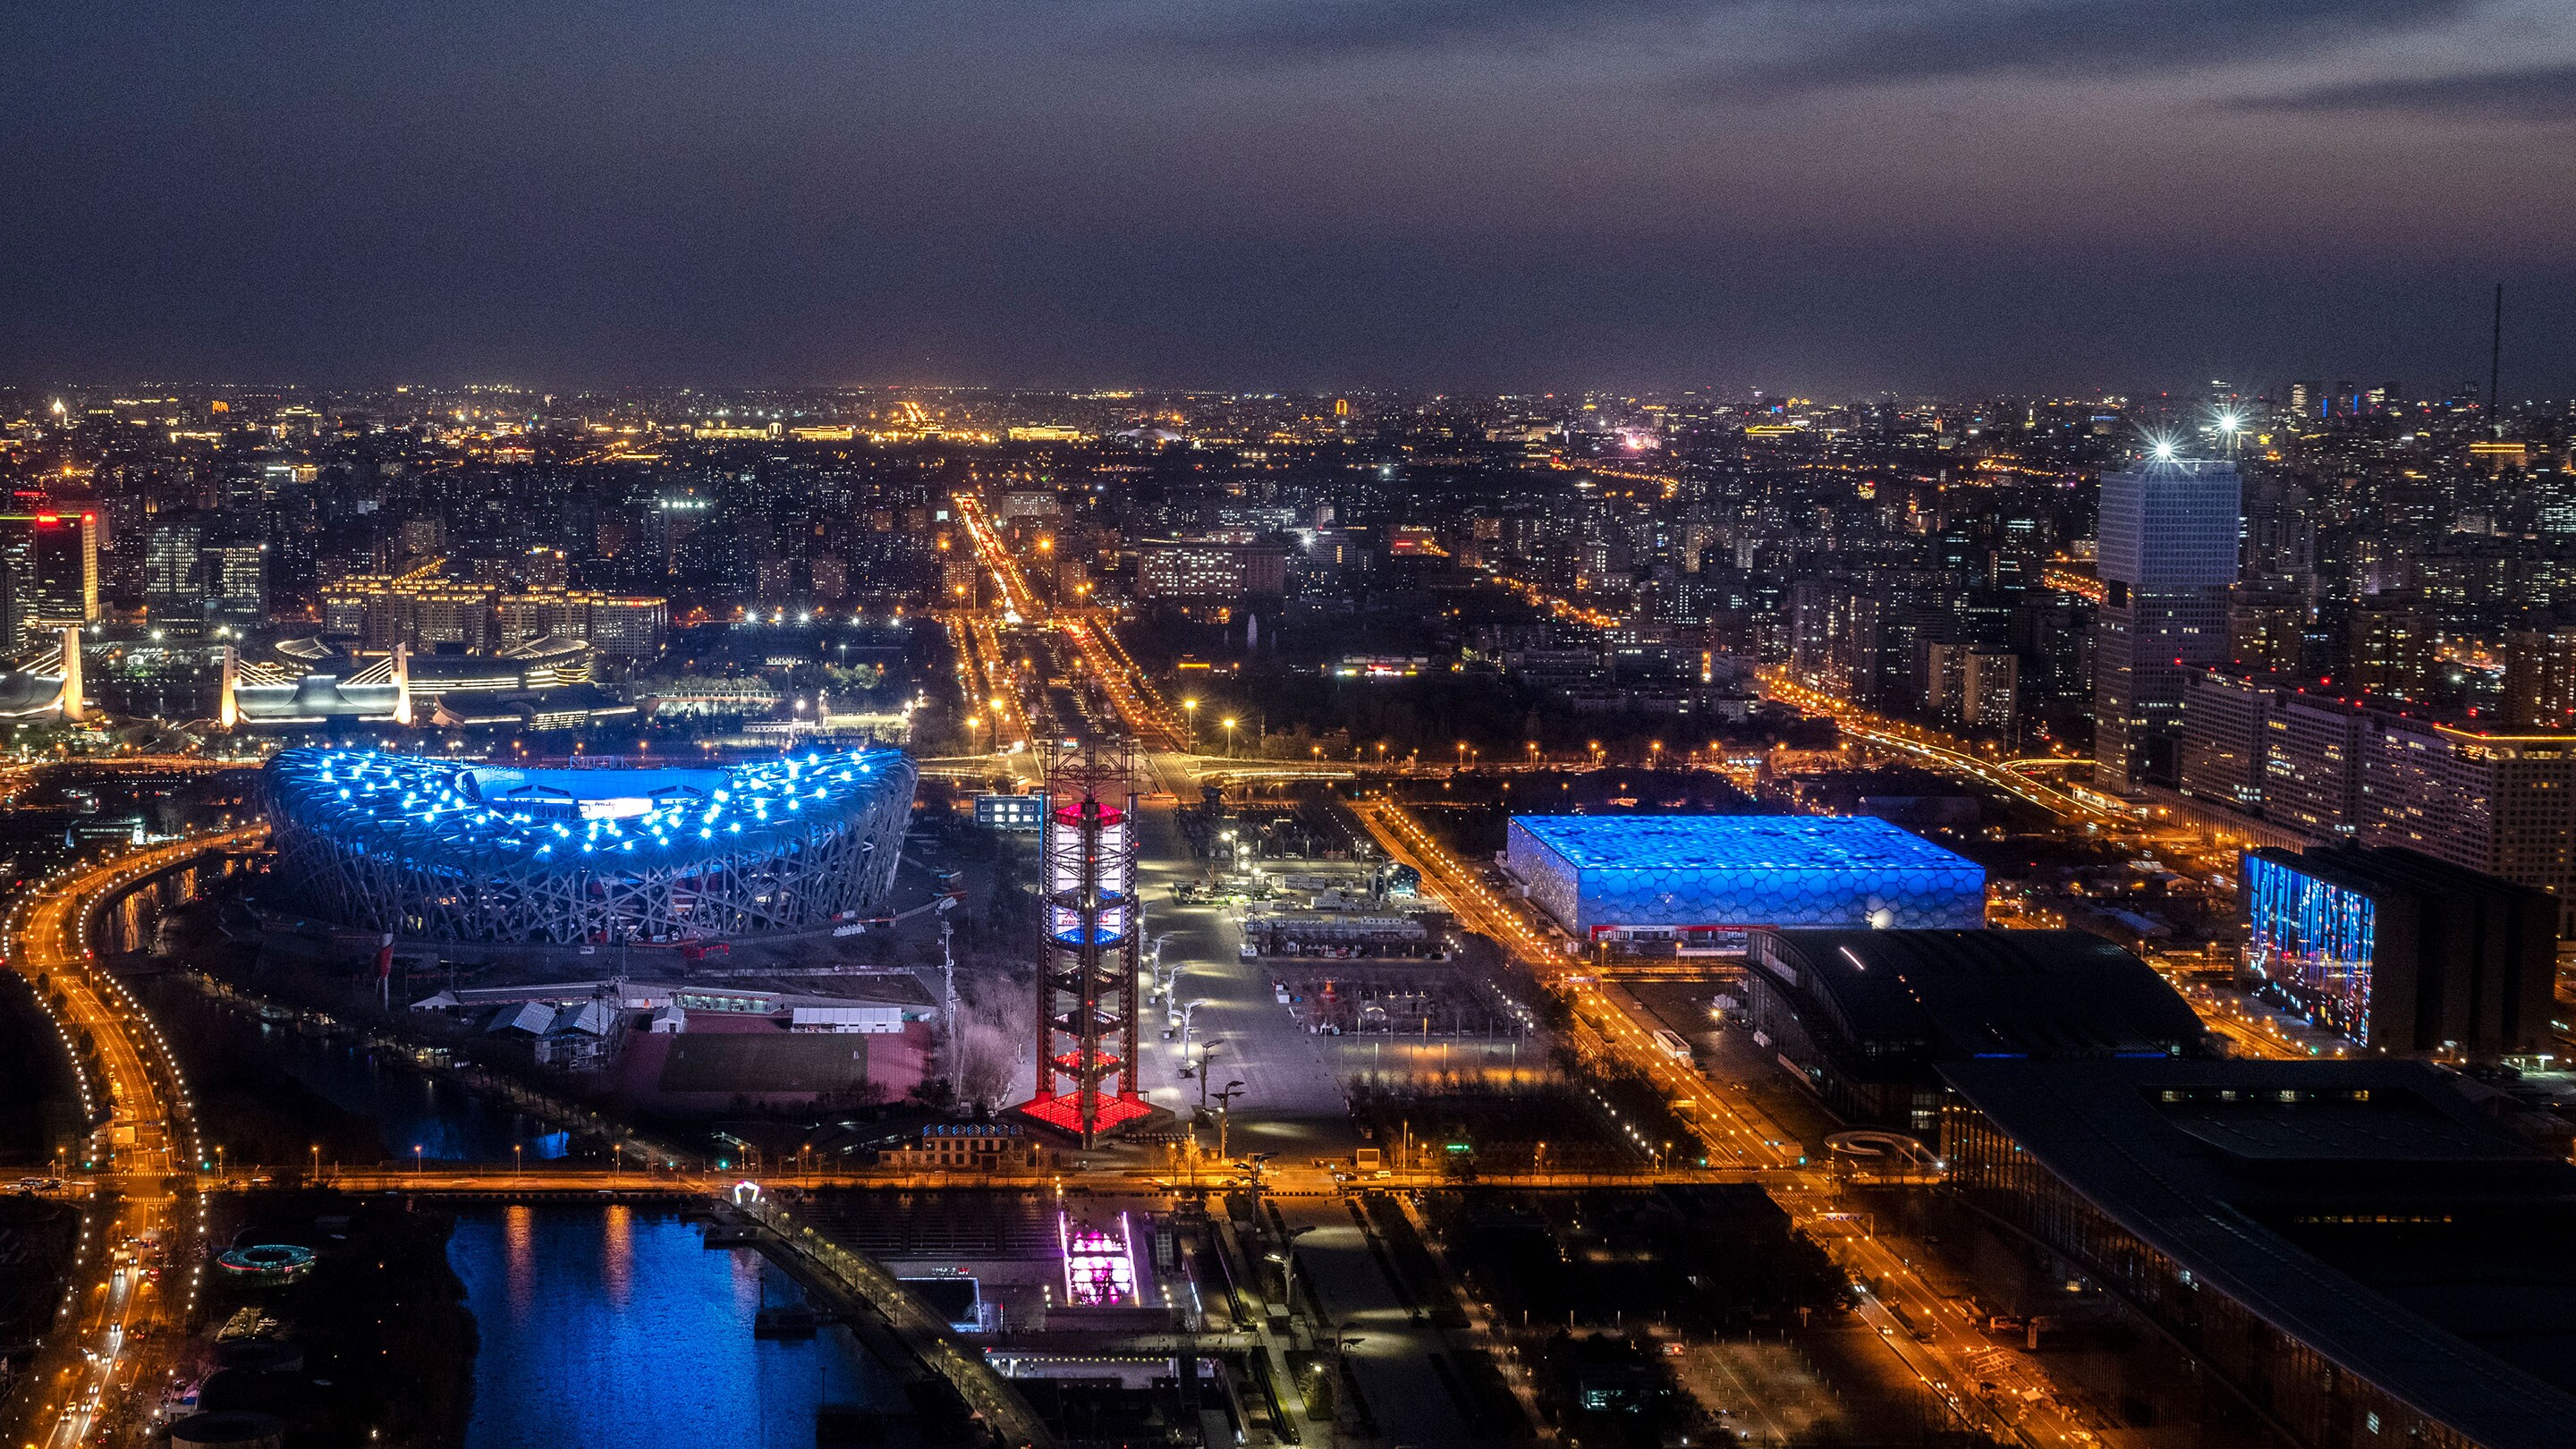 Beijing 2022 venues: reusing, reducing and modernising - Olympic News